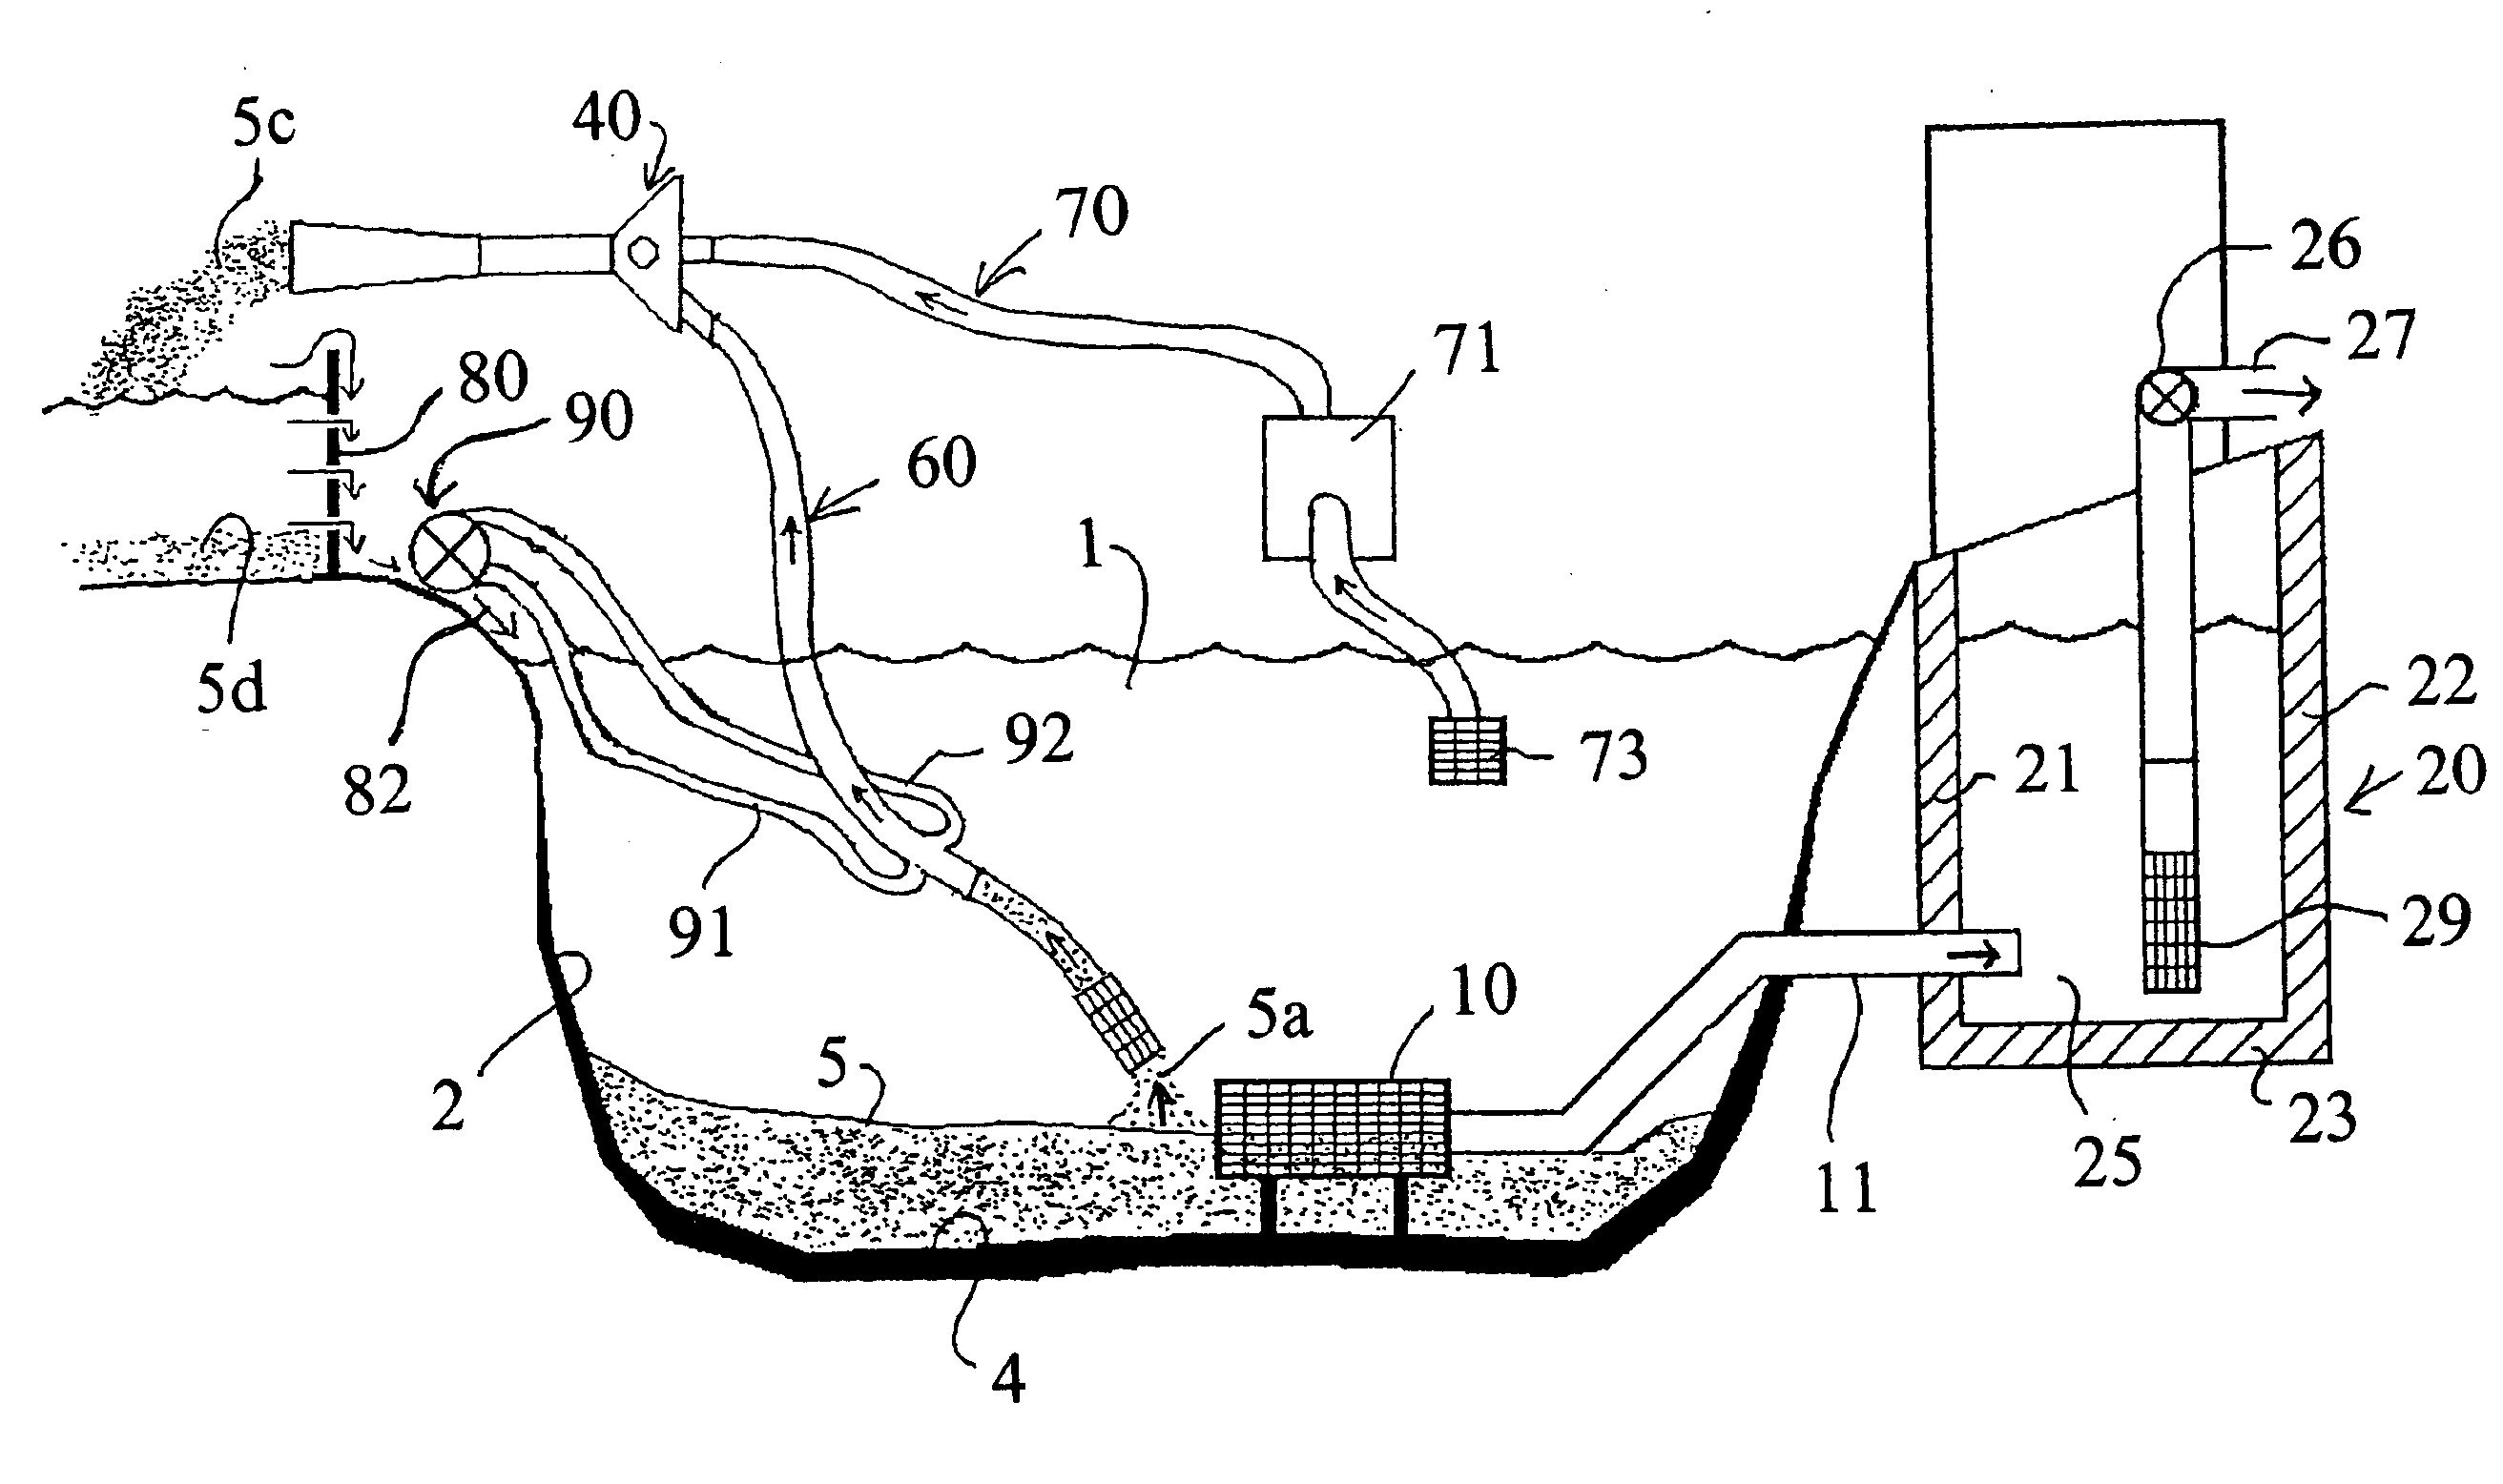 Method and apparatus for remediation and prevention of fouling of recirculating water systems by detritus and other debris